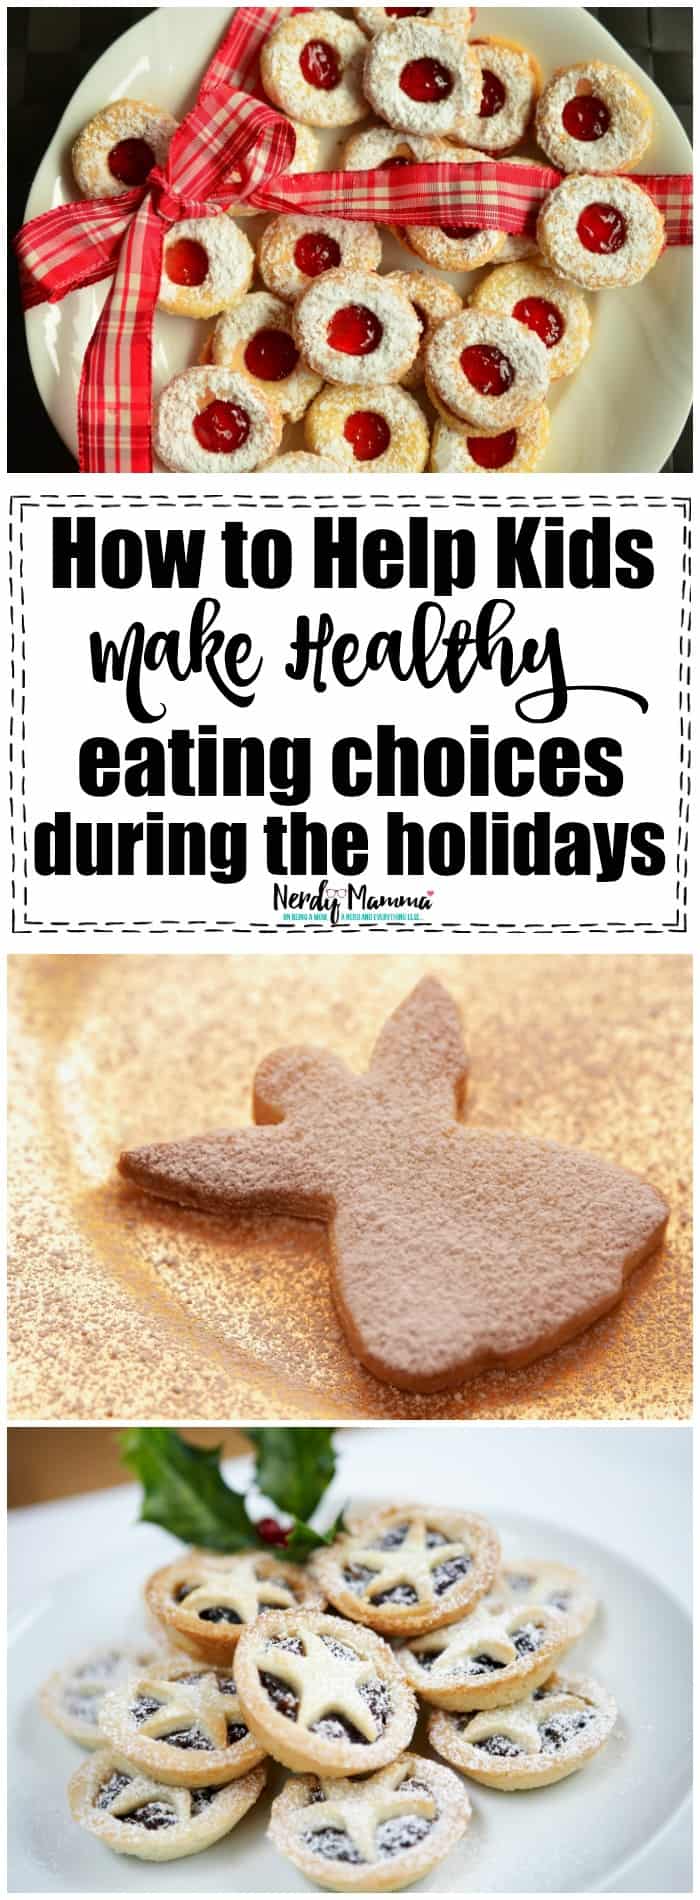 Helping kids make healthy eating choices during the holidays